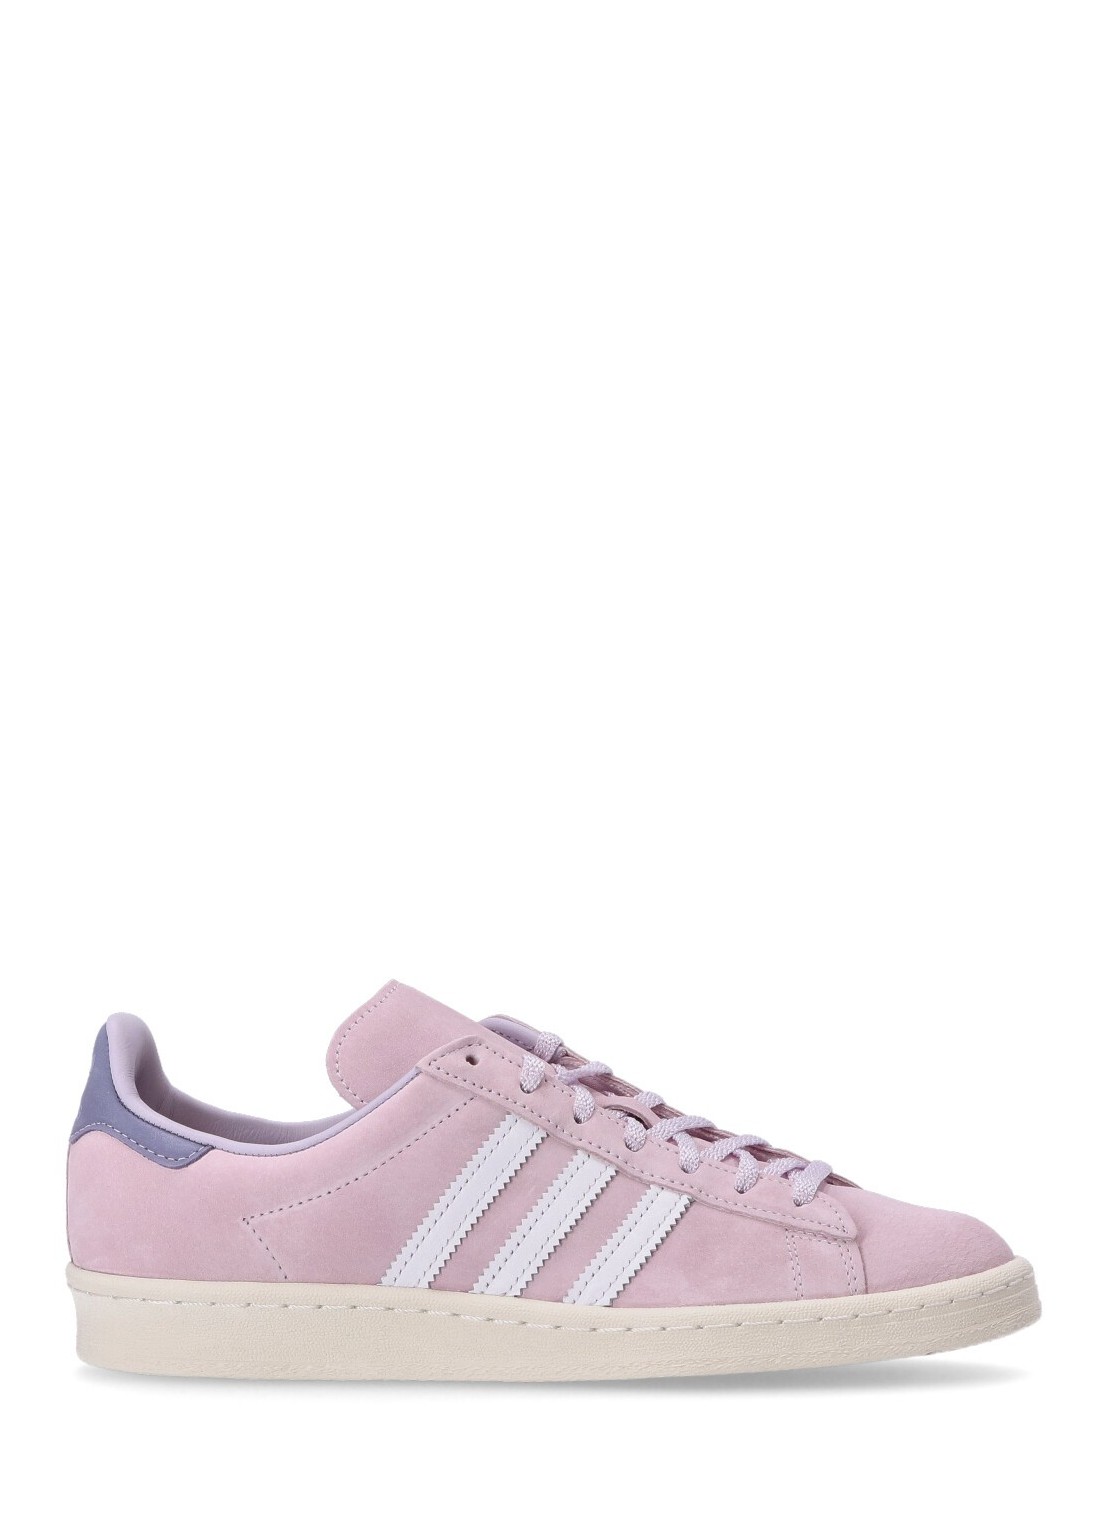 Sneaker adidas originals sneaker woman campus 80's if5335 almost pink ftwr white off white talla 37 